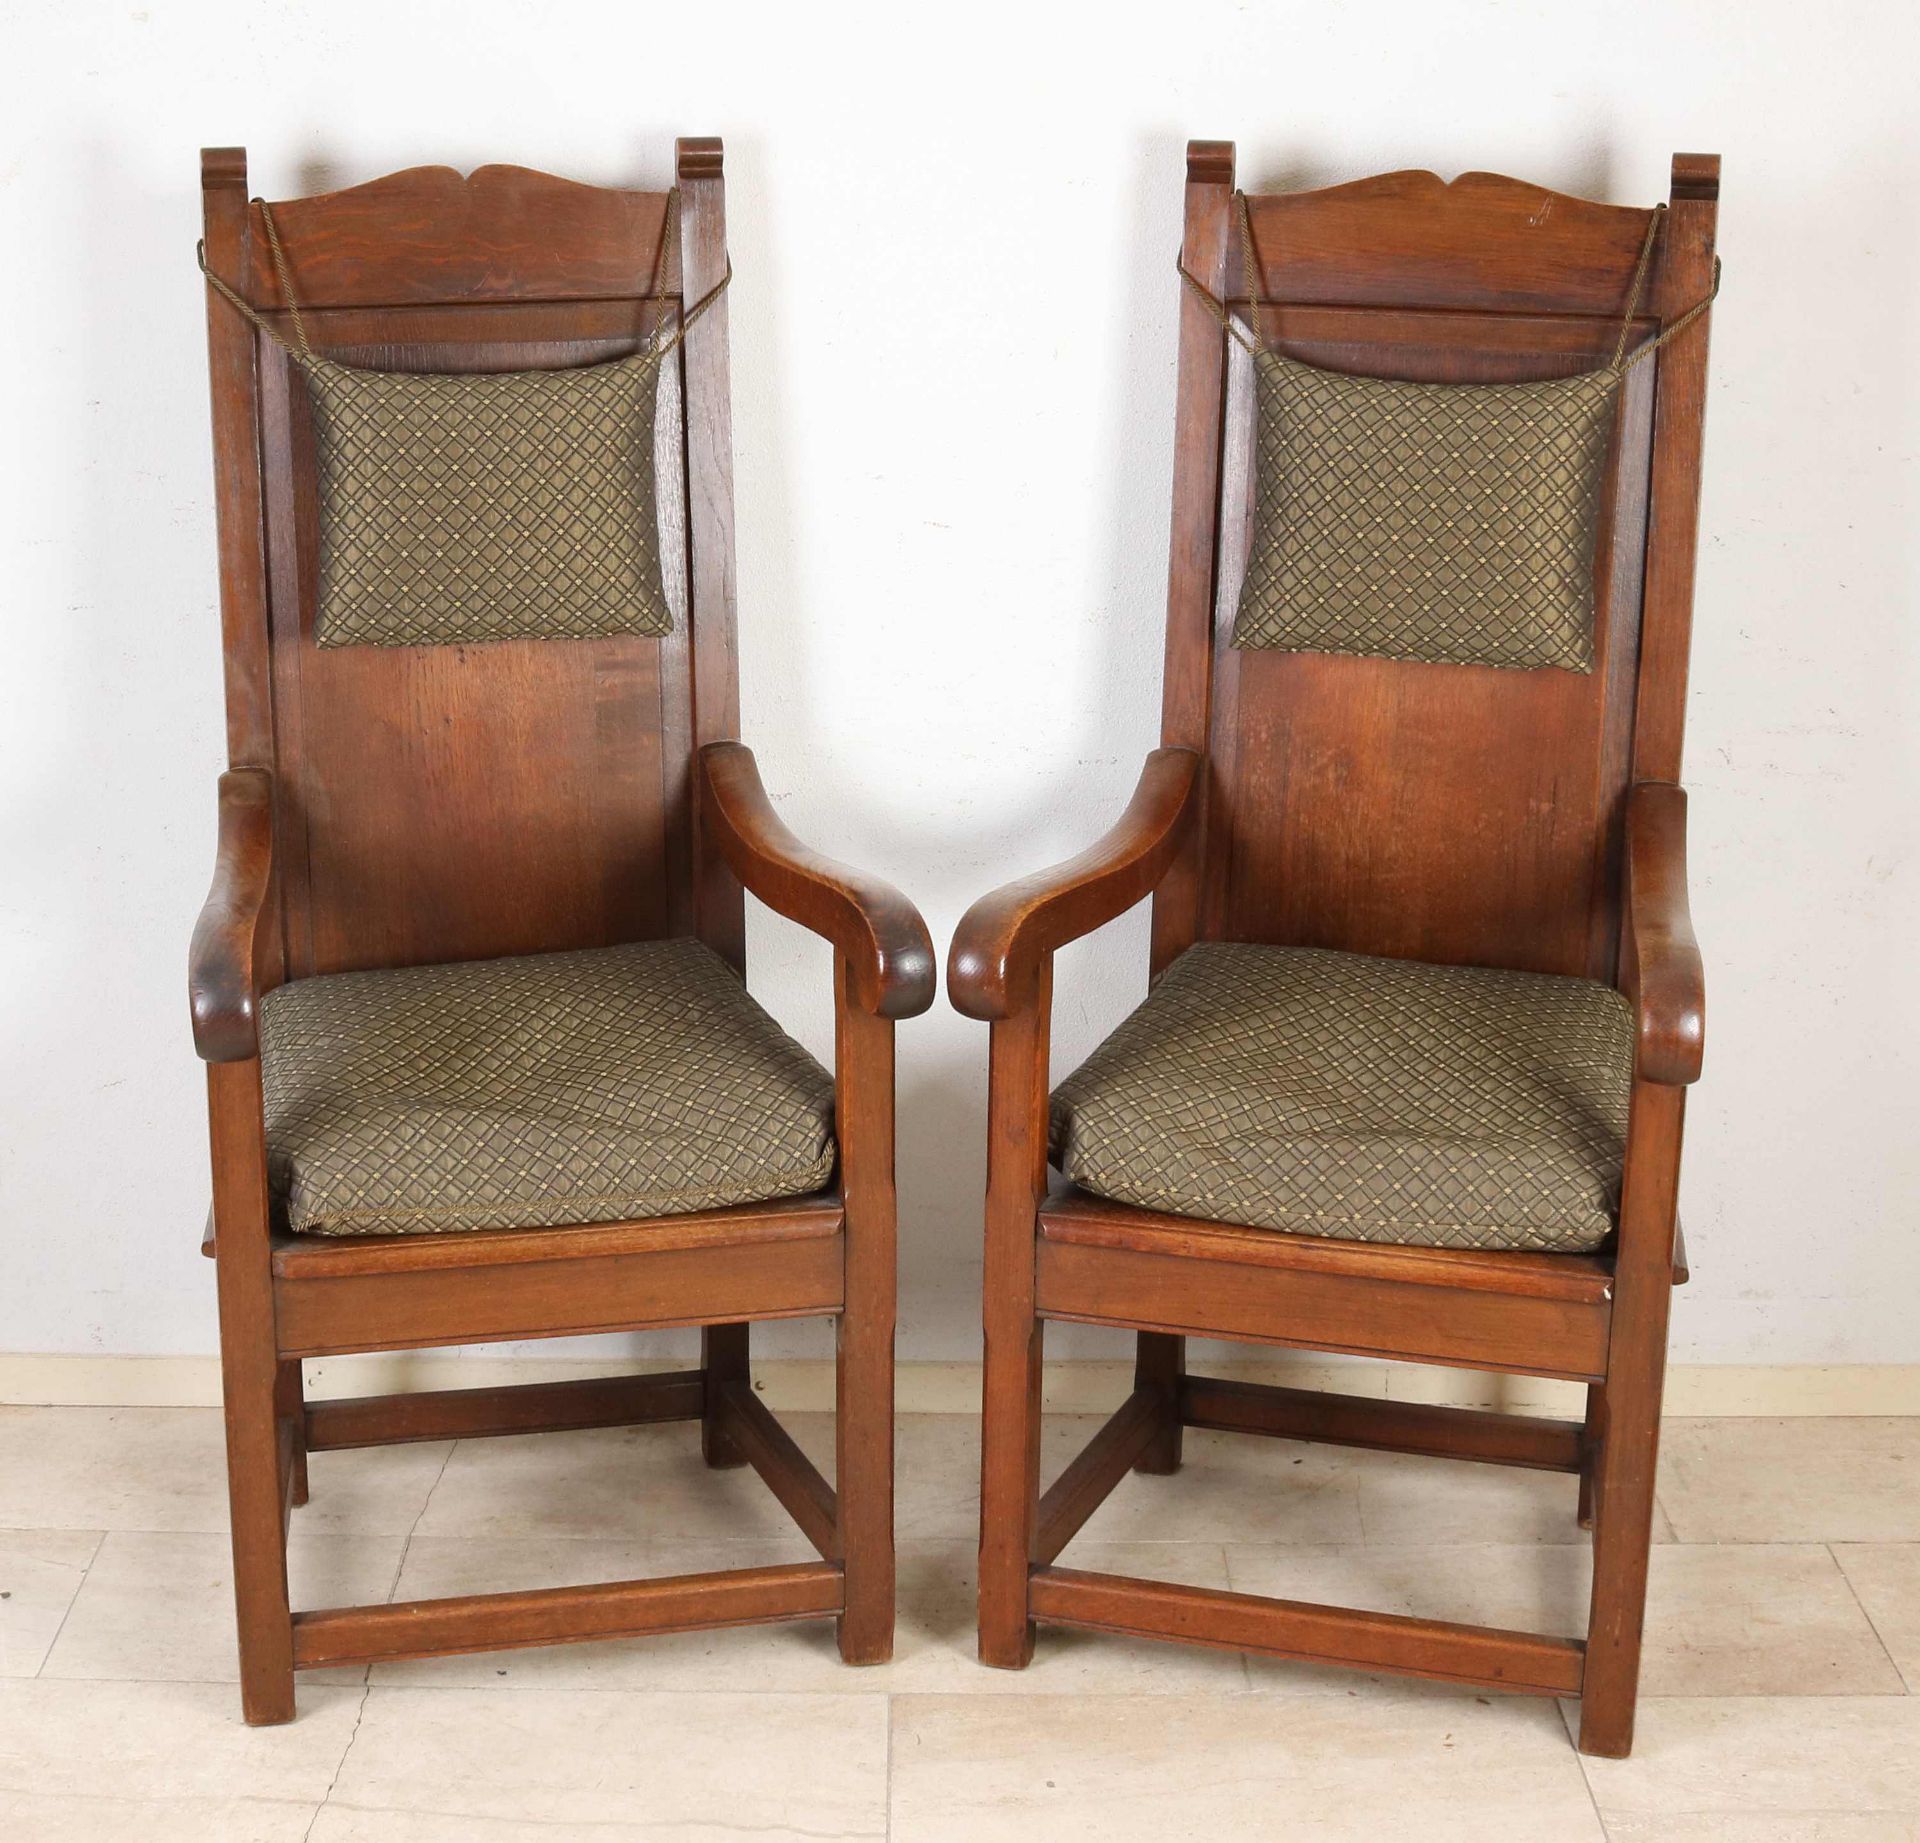 Two oak guild chairs